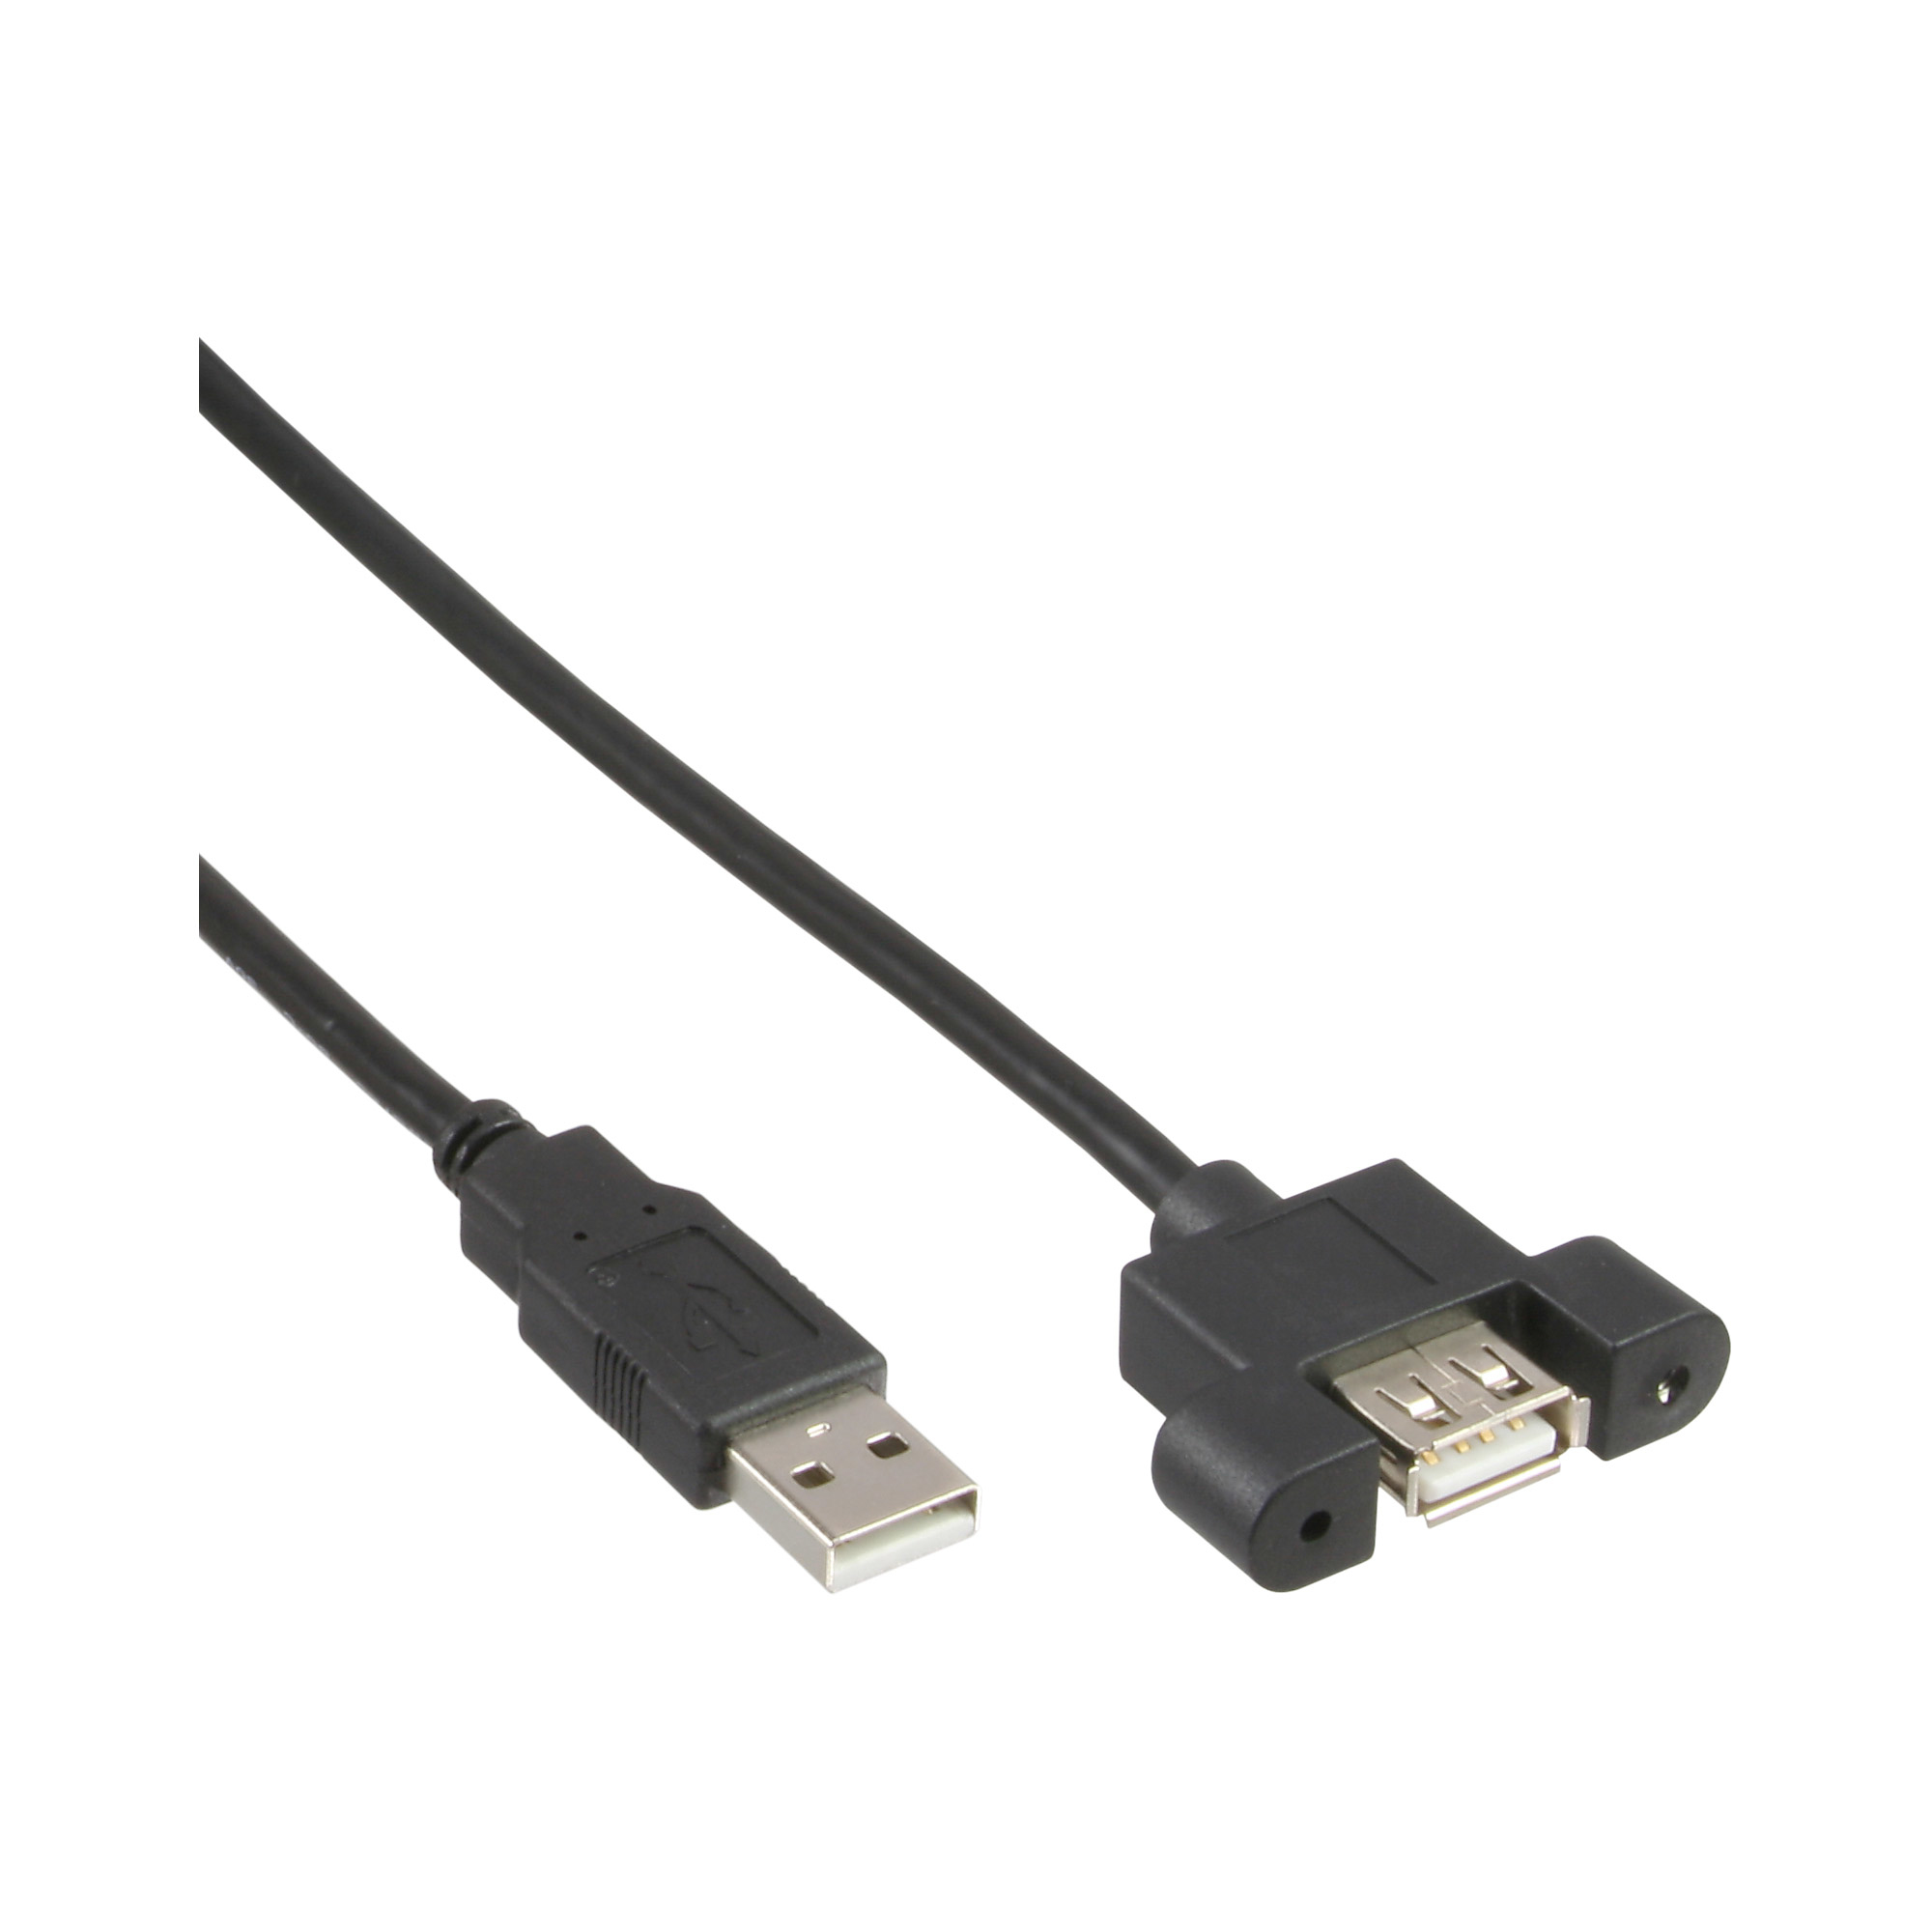 Photos - Cable (video, audio, USB) InLine USB 2.0 Adapter Cable Type A male / A female for slot bracket, 3344 